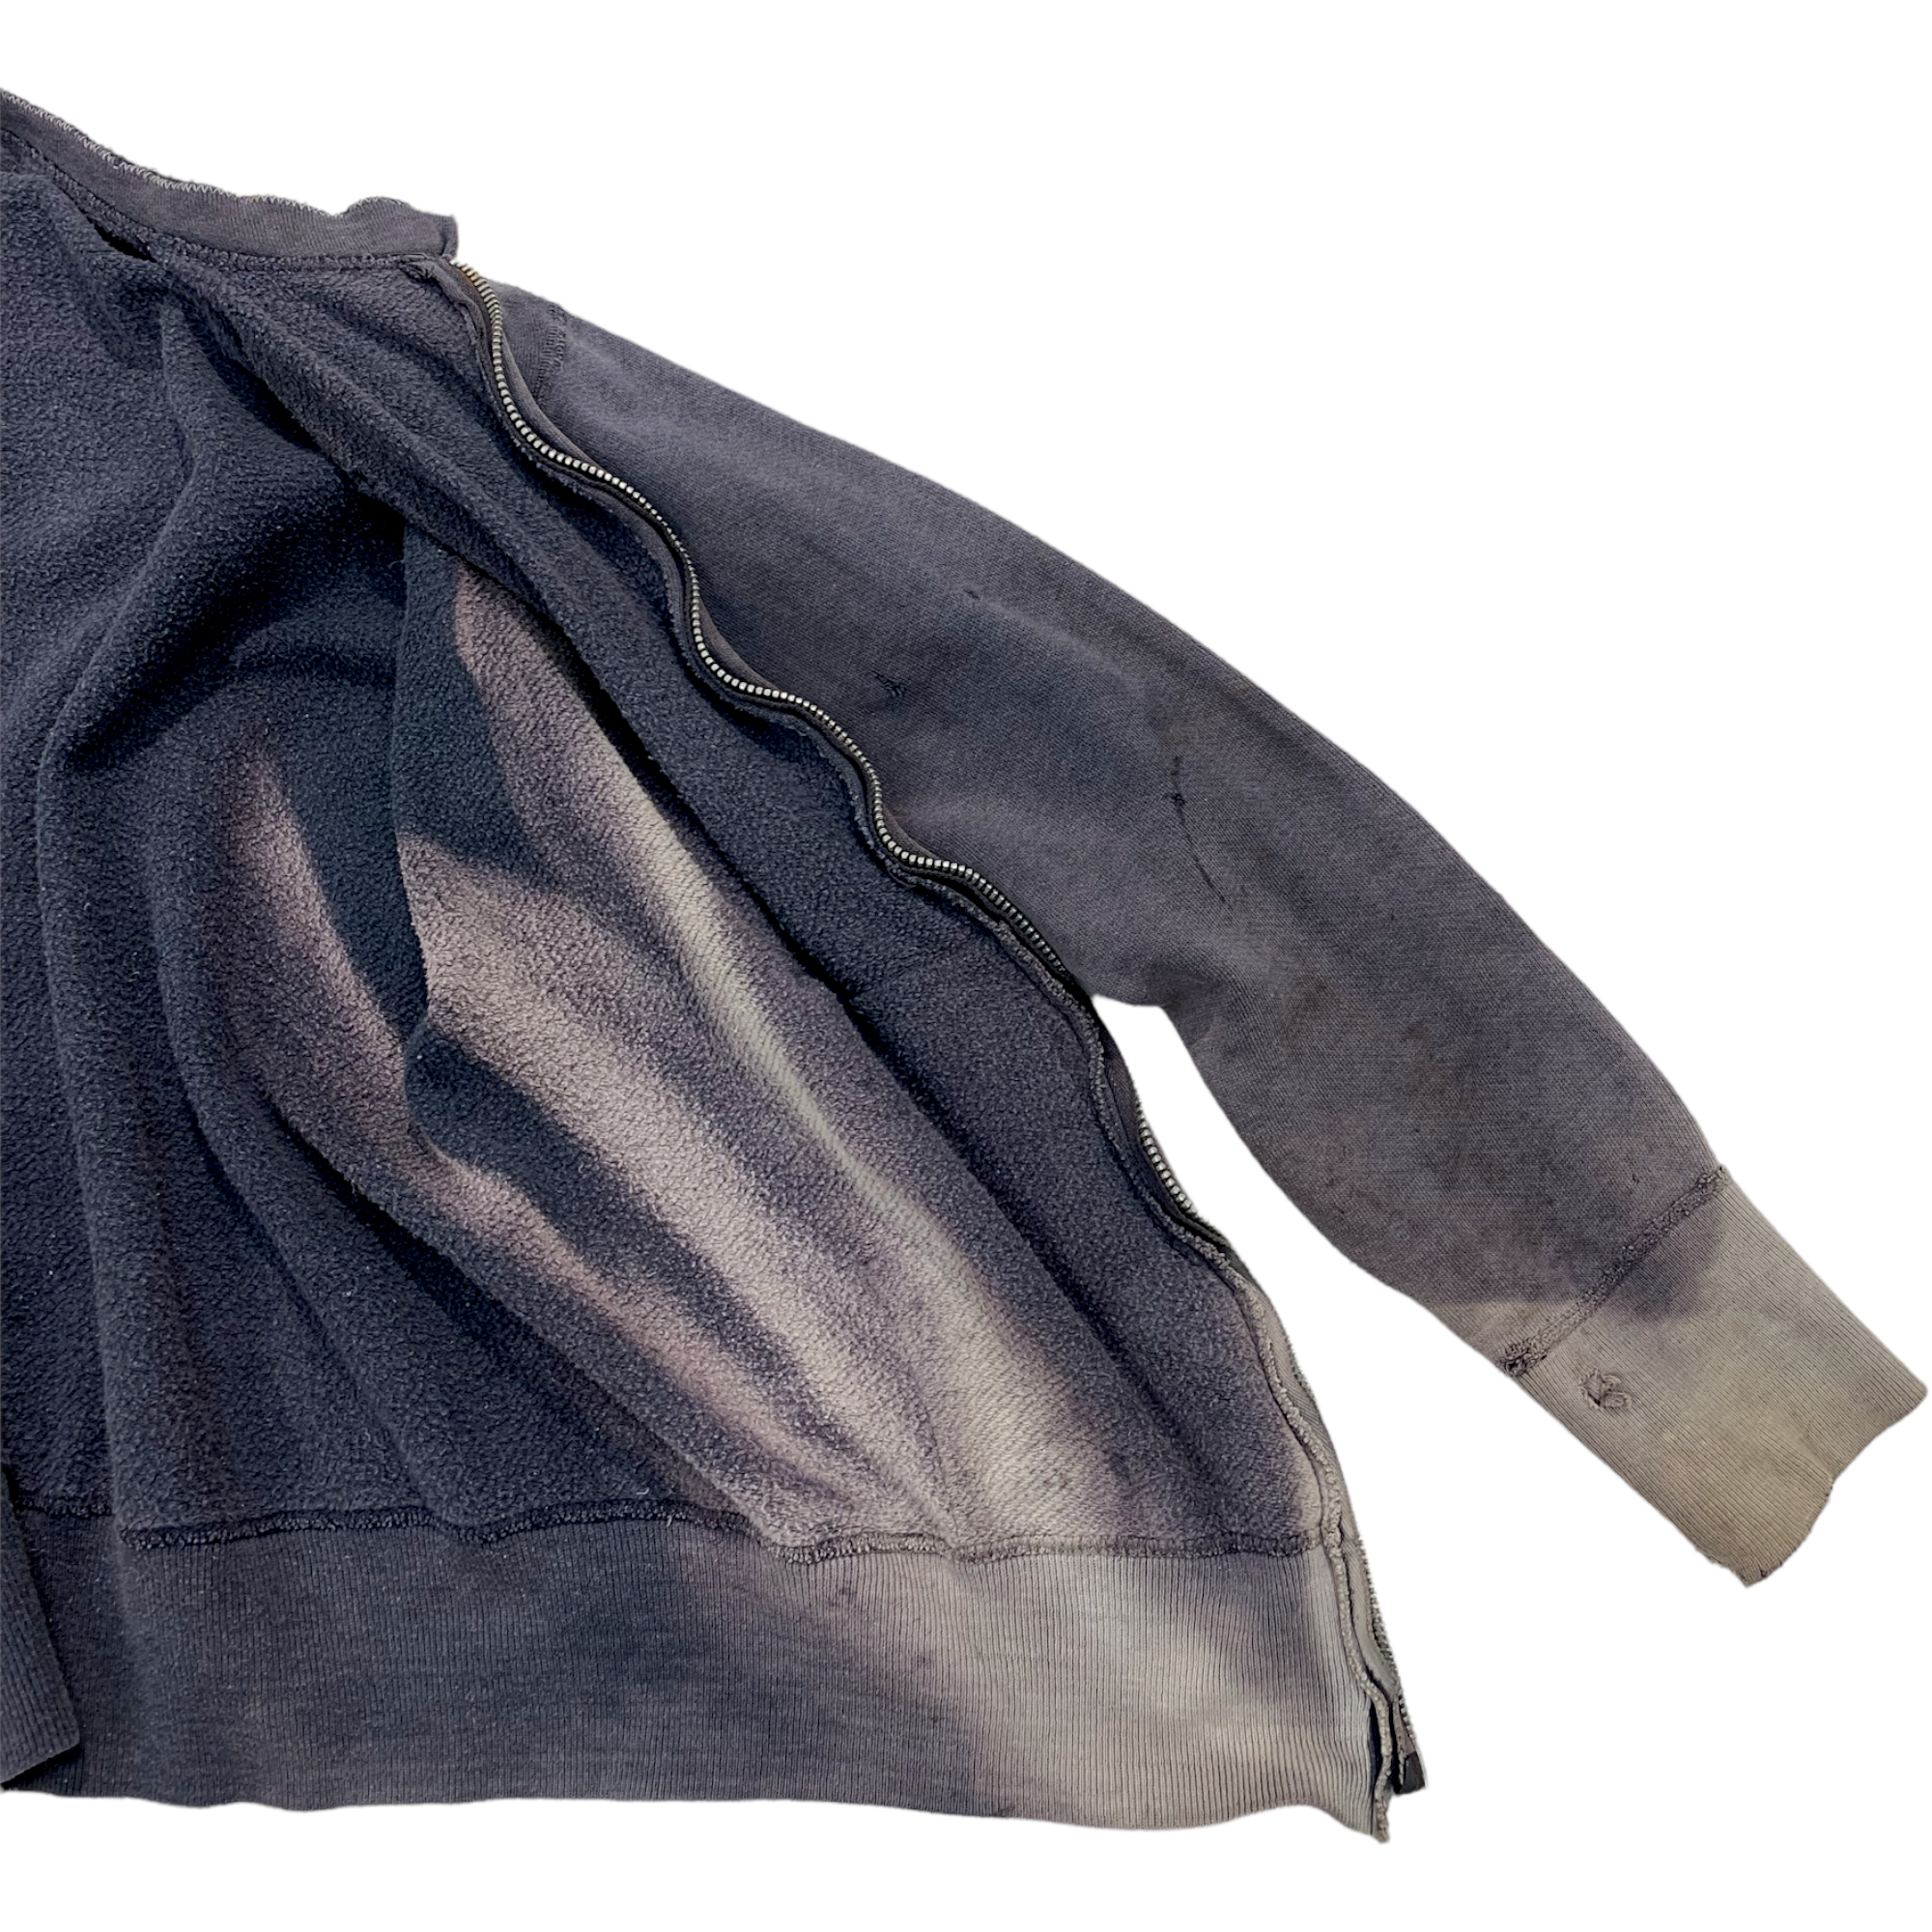 1960s BVD Sun Bleached and Distressed Cut Collar Zip Sweatshirt - Faded Navy - XS/S